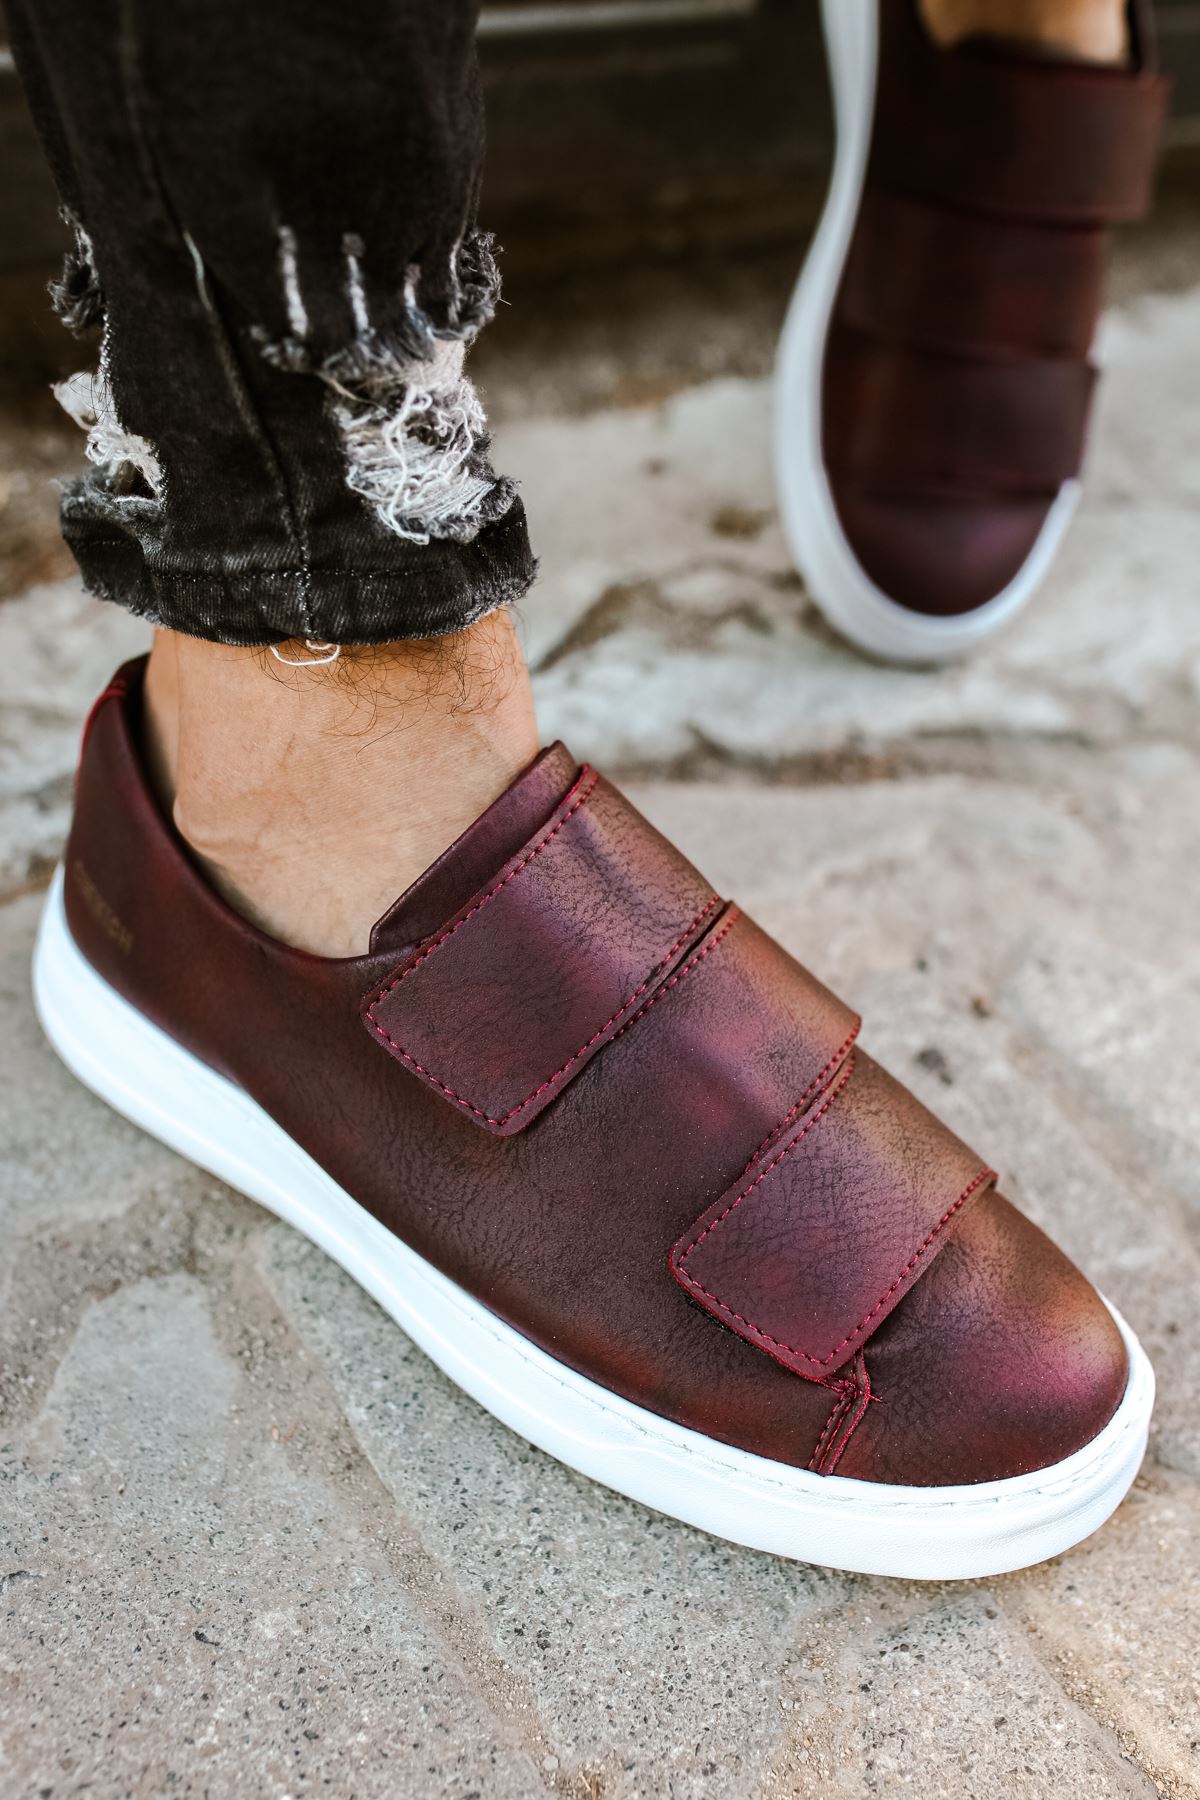 Chekich Men Casual Sneakers Claret Red Artificial Leather Sport Shoes Velcro Style Daily Lightweight Sewing and Light Base Design Odorless Comfortable 2021 Summer & Autumn Fashion Flats Suits Wedding CH007 V3